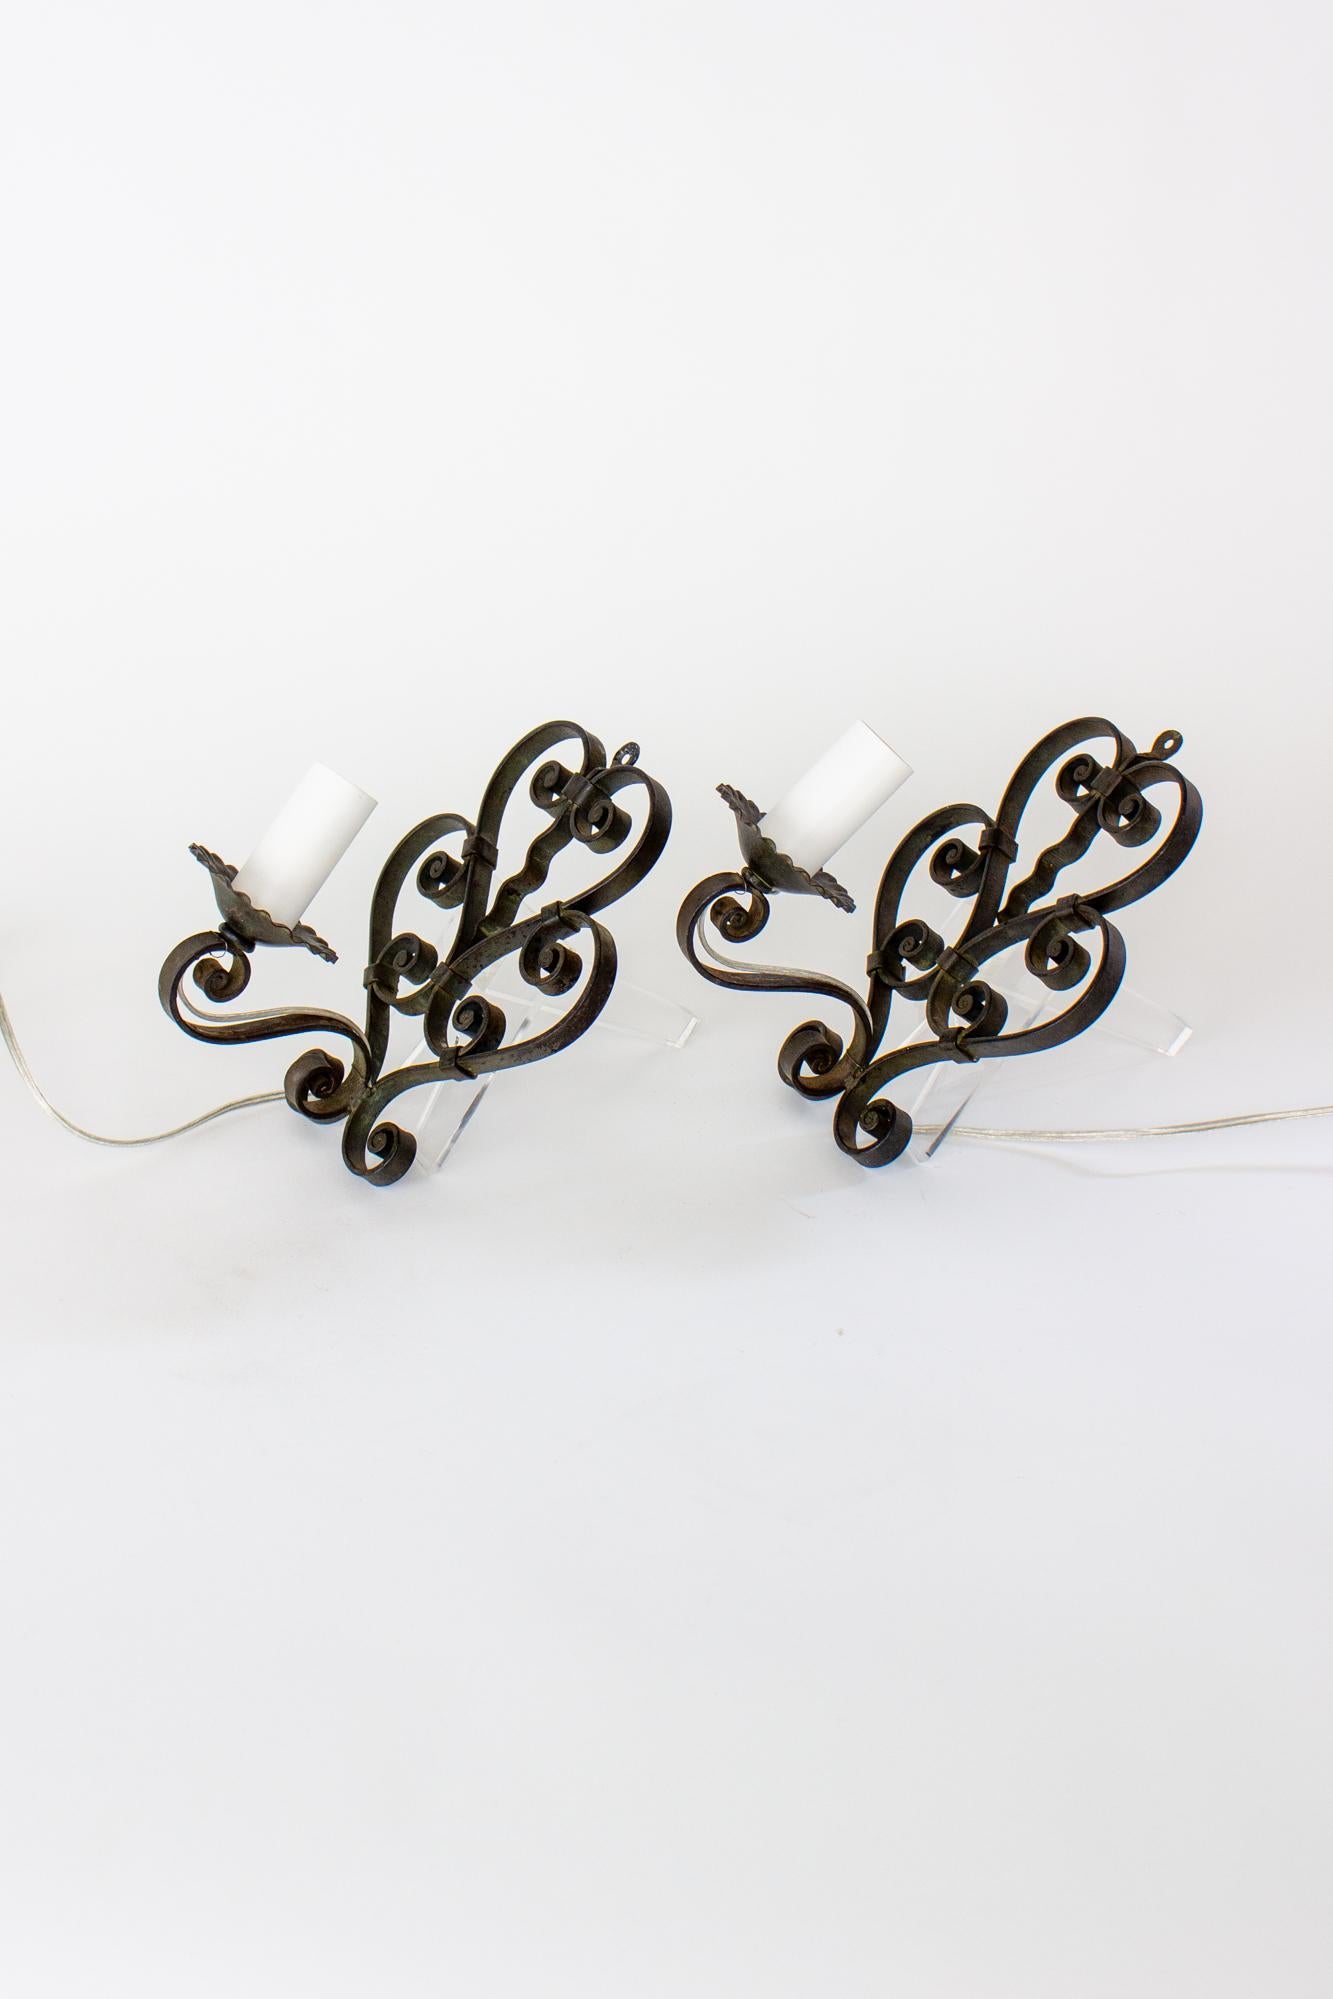 Arts and Crafts Early 20th Century Wrought Iron Pin Up Sconces, a Pair For Sale